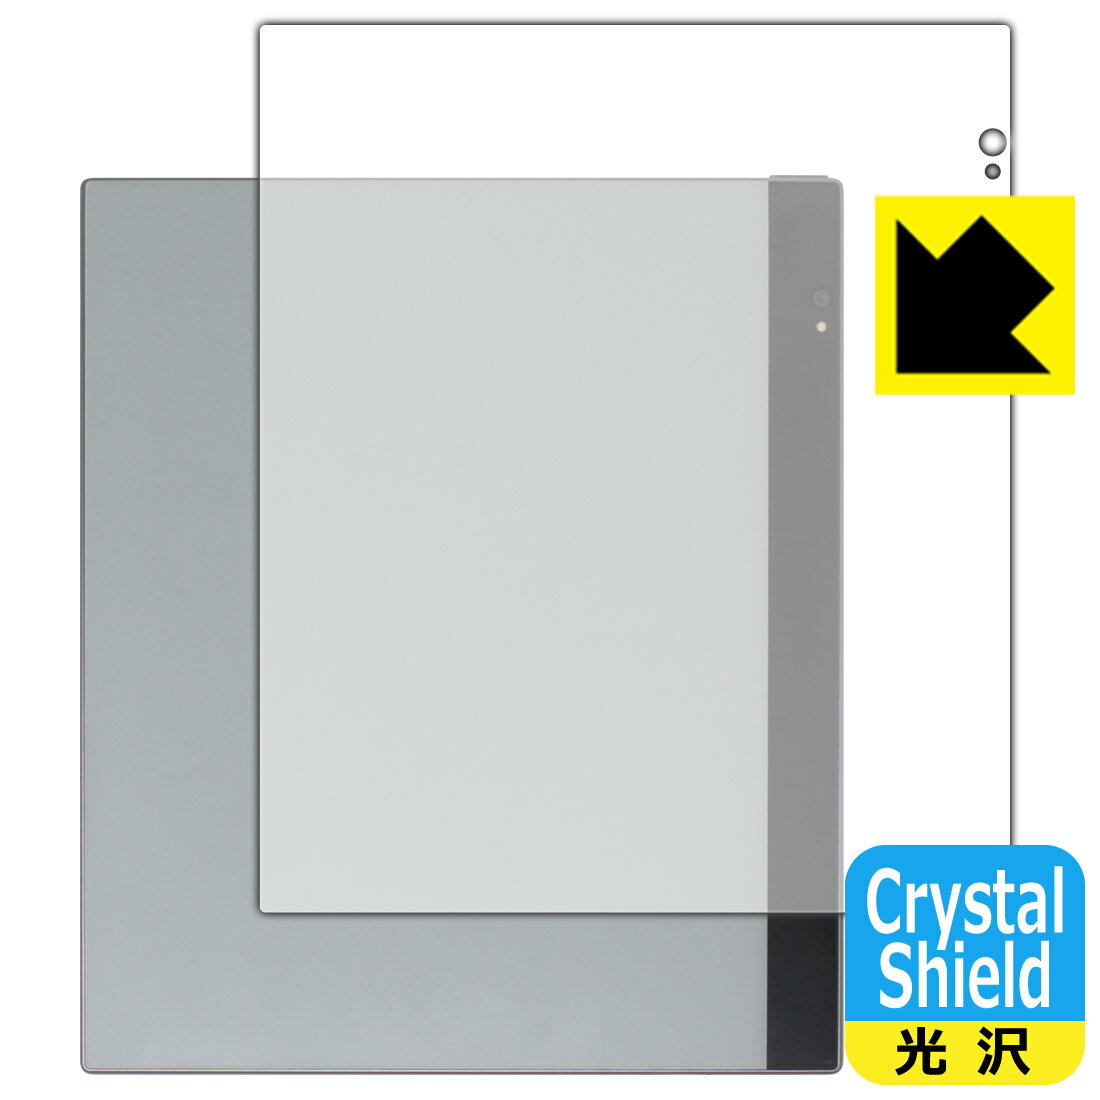 Crystal Shield【光沢】保護フィルム Bigme inkNote Color (10.3インチ) 背面用 日本製 自社製造直販